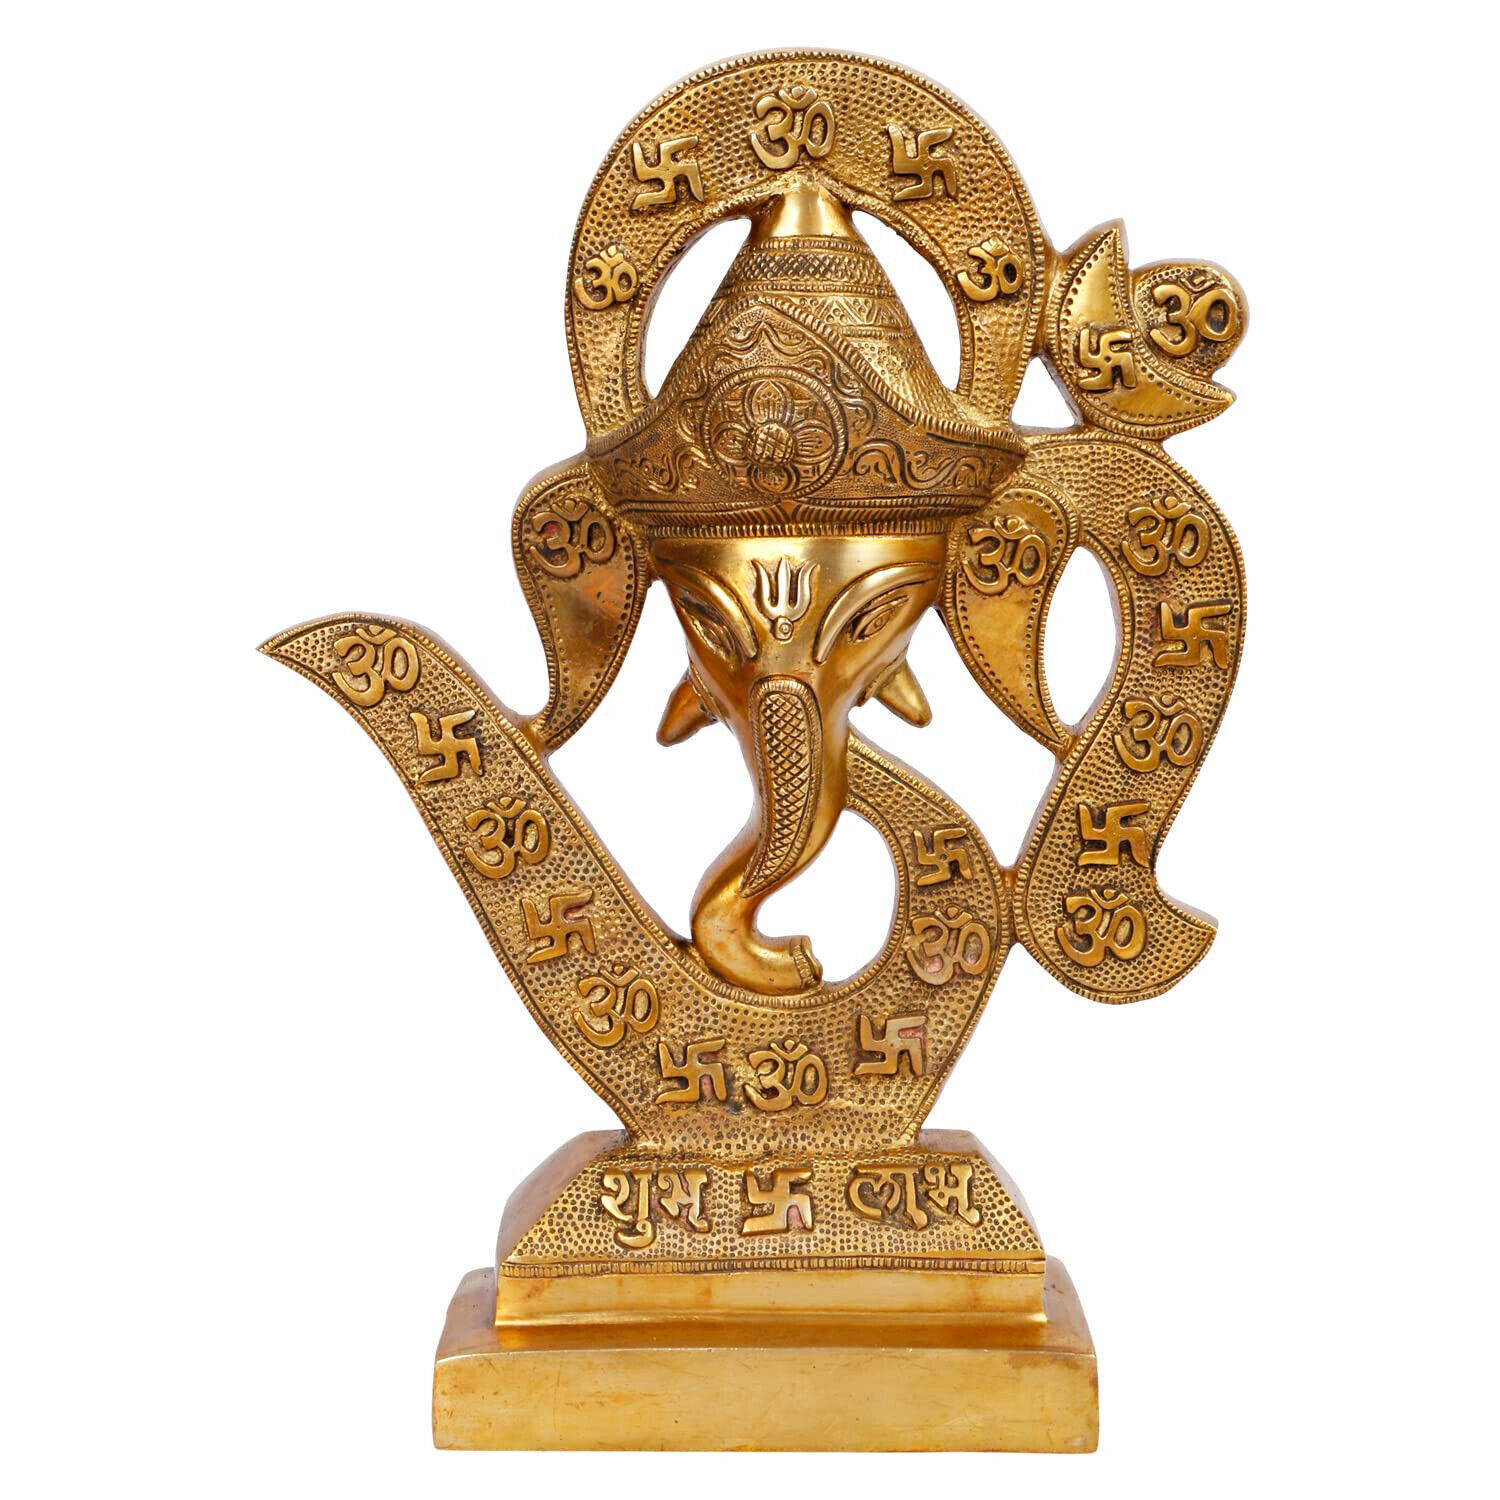 Indian Traditional Brass Ganesha Face On Om With Shub Labh For Good Luck & Pooja